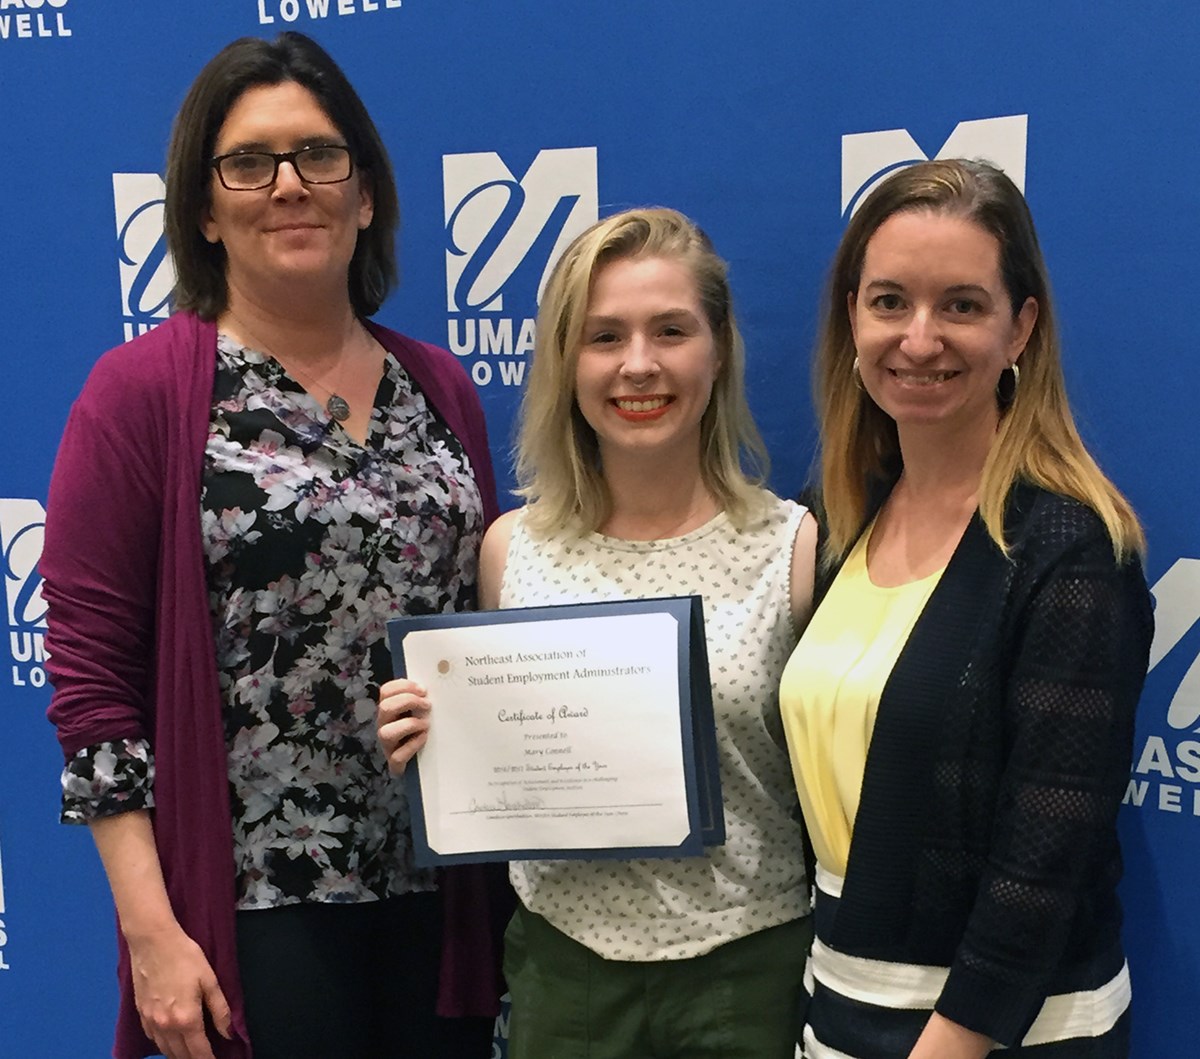 Mary Connell, 2017 UMass Lowell Student Employee of the Year, was recognized by Patricia Coffey of University Relations, her nominating supervisor, and Candice Garabedian, Student Employment Manager.